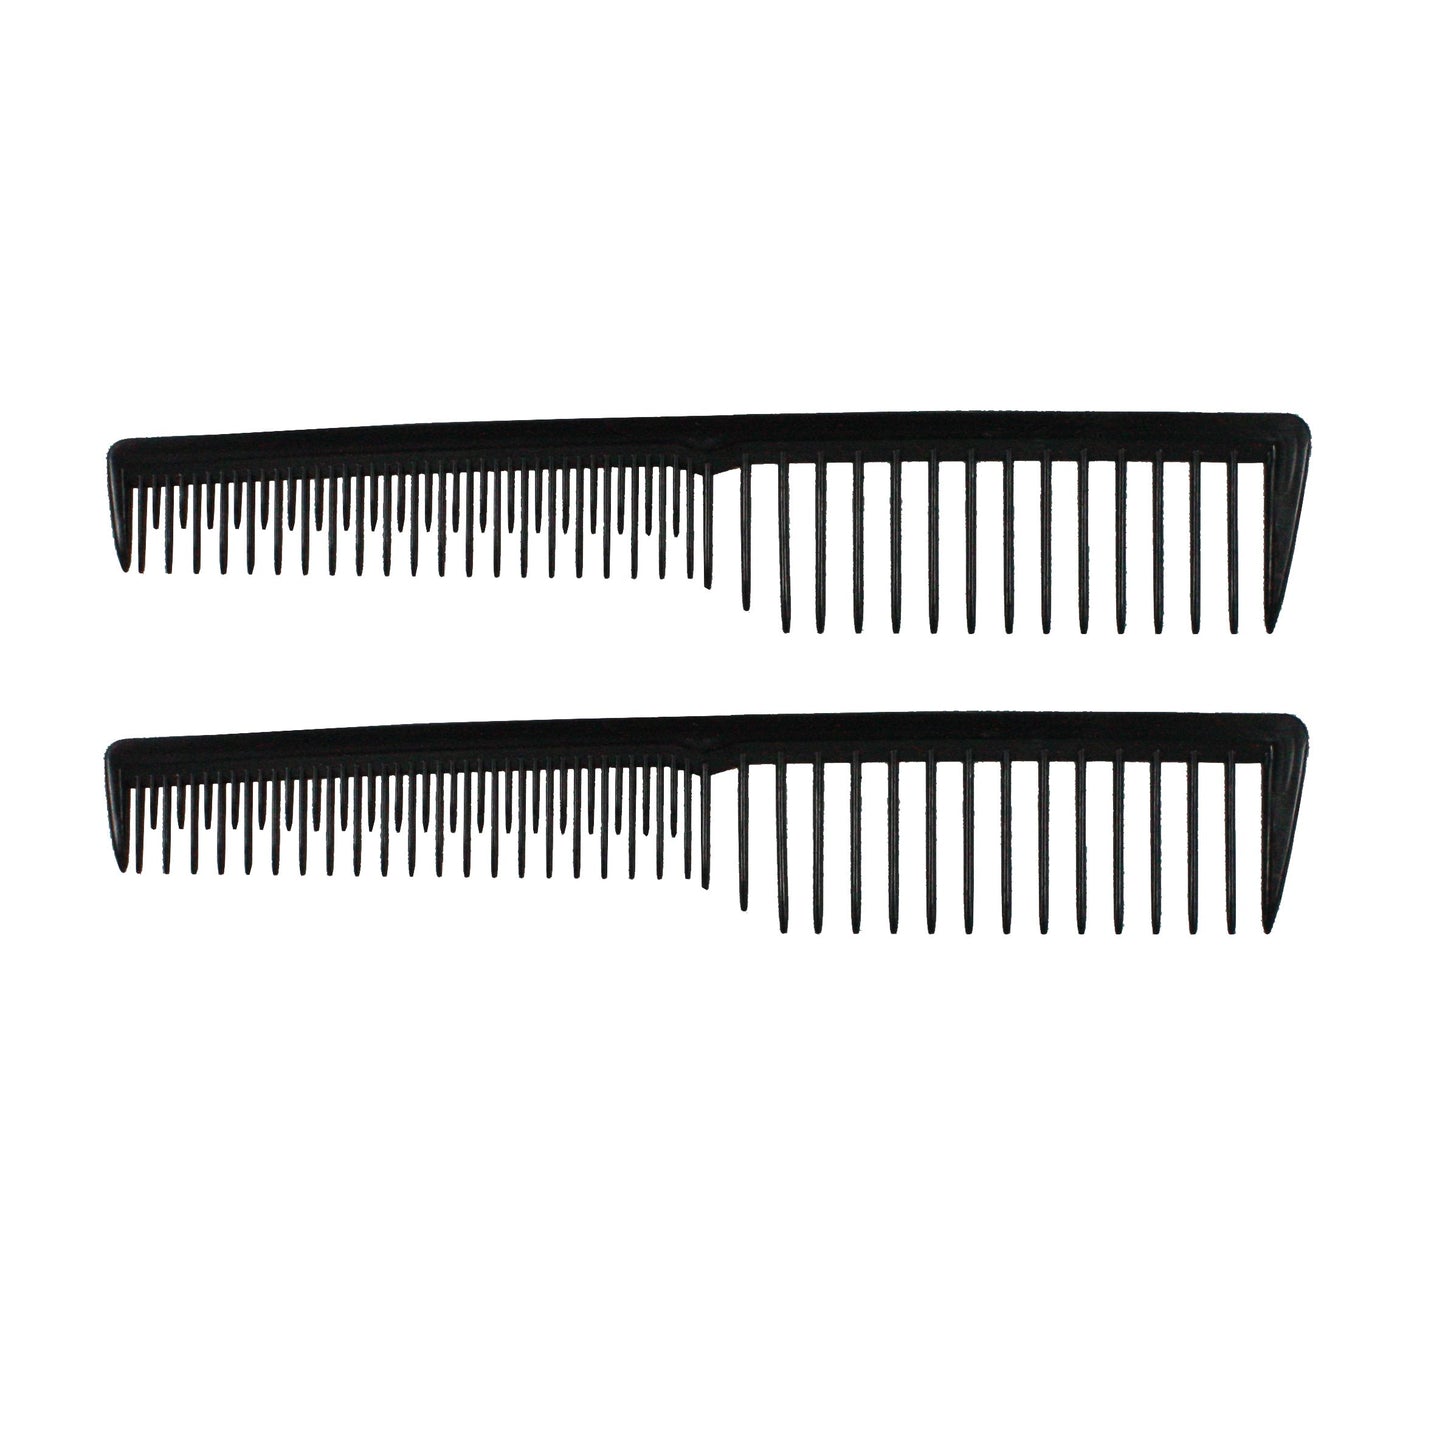 Amelia Beauty, 7in Black Plastic Wide Tooth Tease Comb, Made in USA, Professional Grade Pocket Hair Comb, Wet, Tangled Hair, Flip to Lift, Tease,  Everyday Styling Cutting Hair Styling Tool, 2 Pack